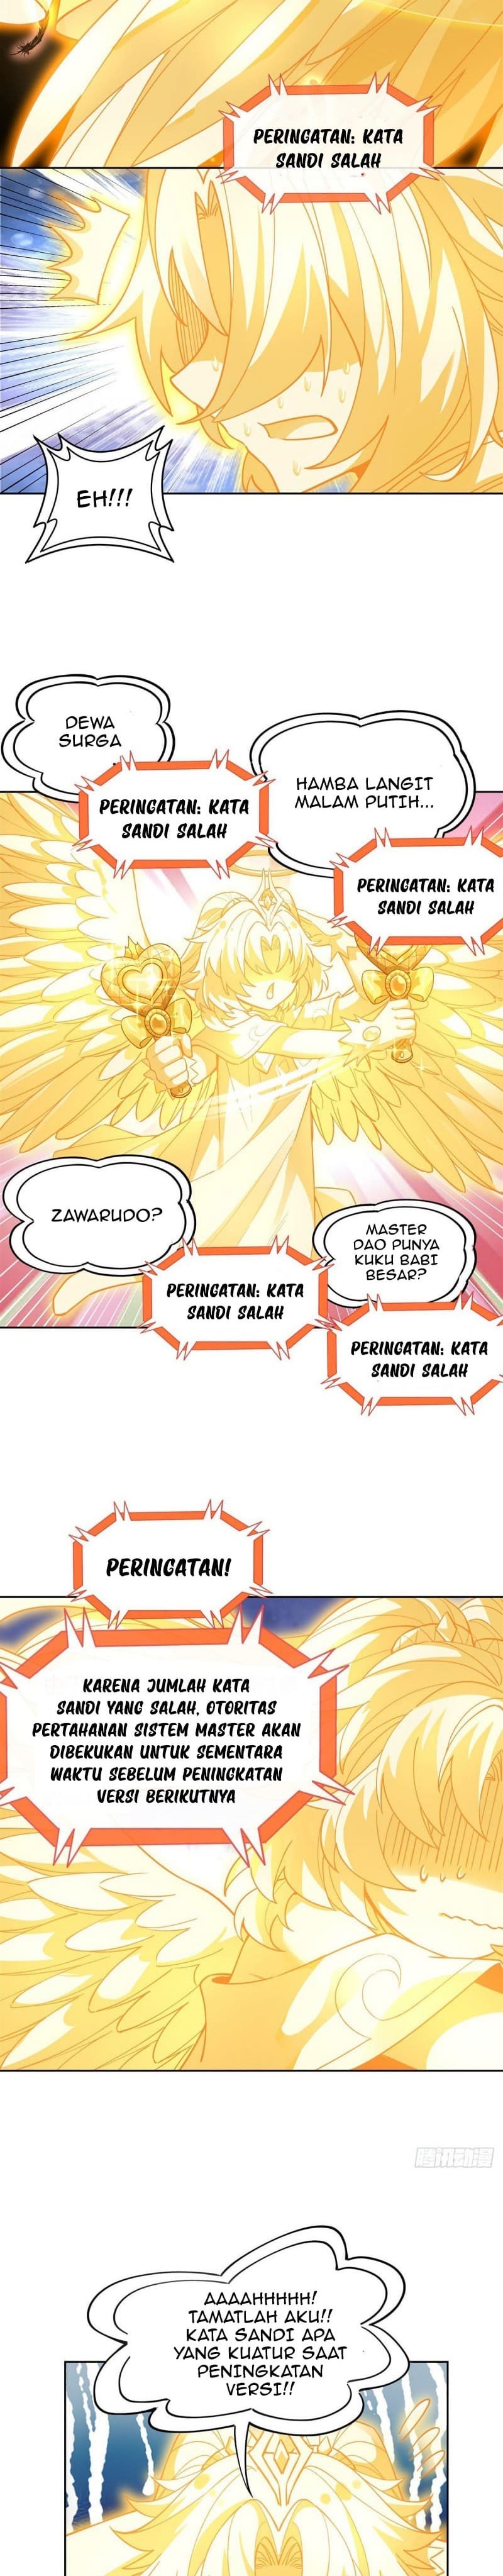 Dilarang COPAS - situs resmi www.mangacanblog.com - Komik my female apprentices are all big shots from the future 039 - chapter 39 40 Indonesia my female apprentices are all big shots from the future 039 - chapter 39 Terbaru 14|Baca Manga Komik Indonesia|Mangacan